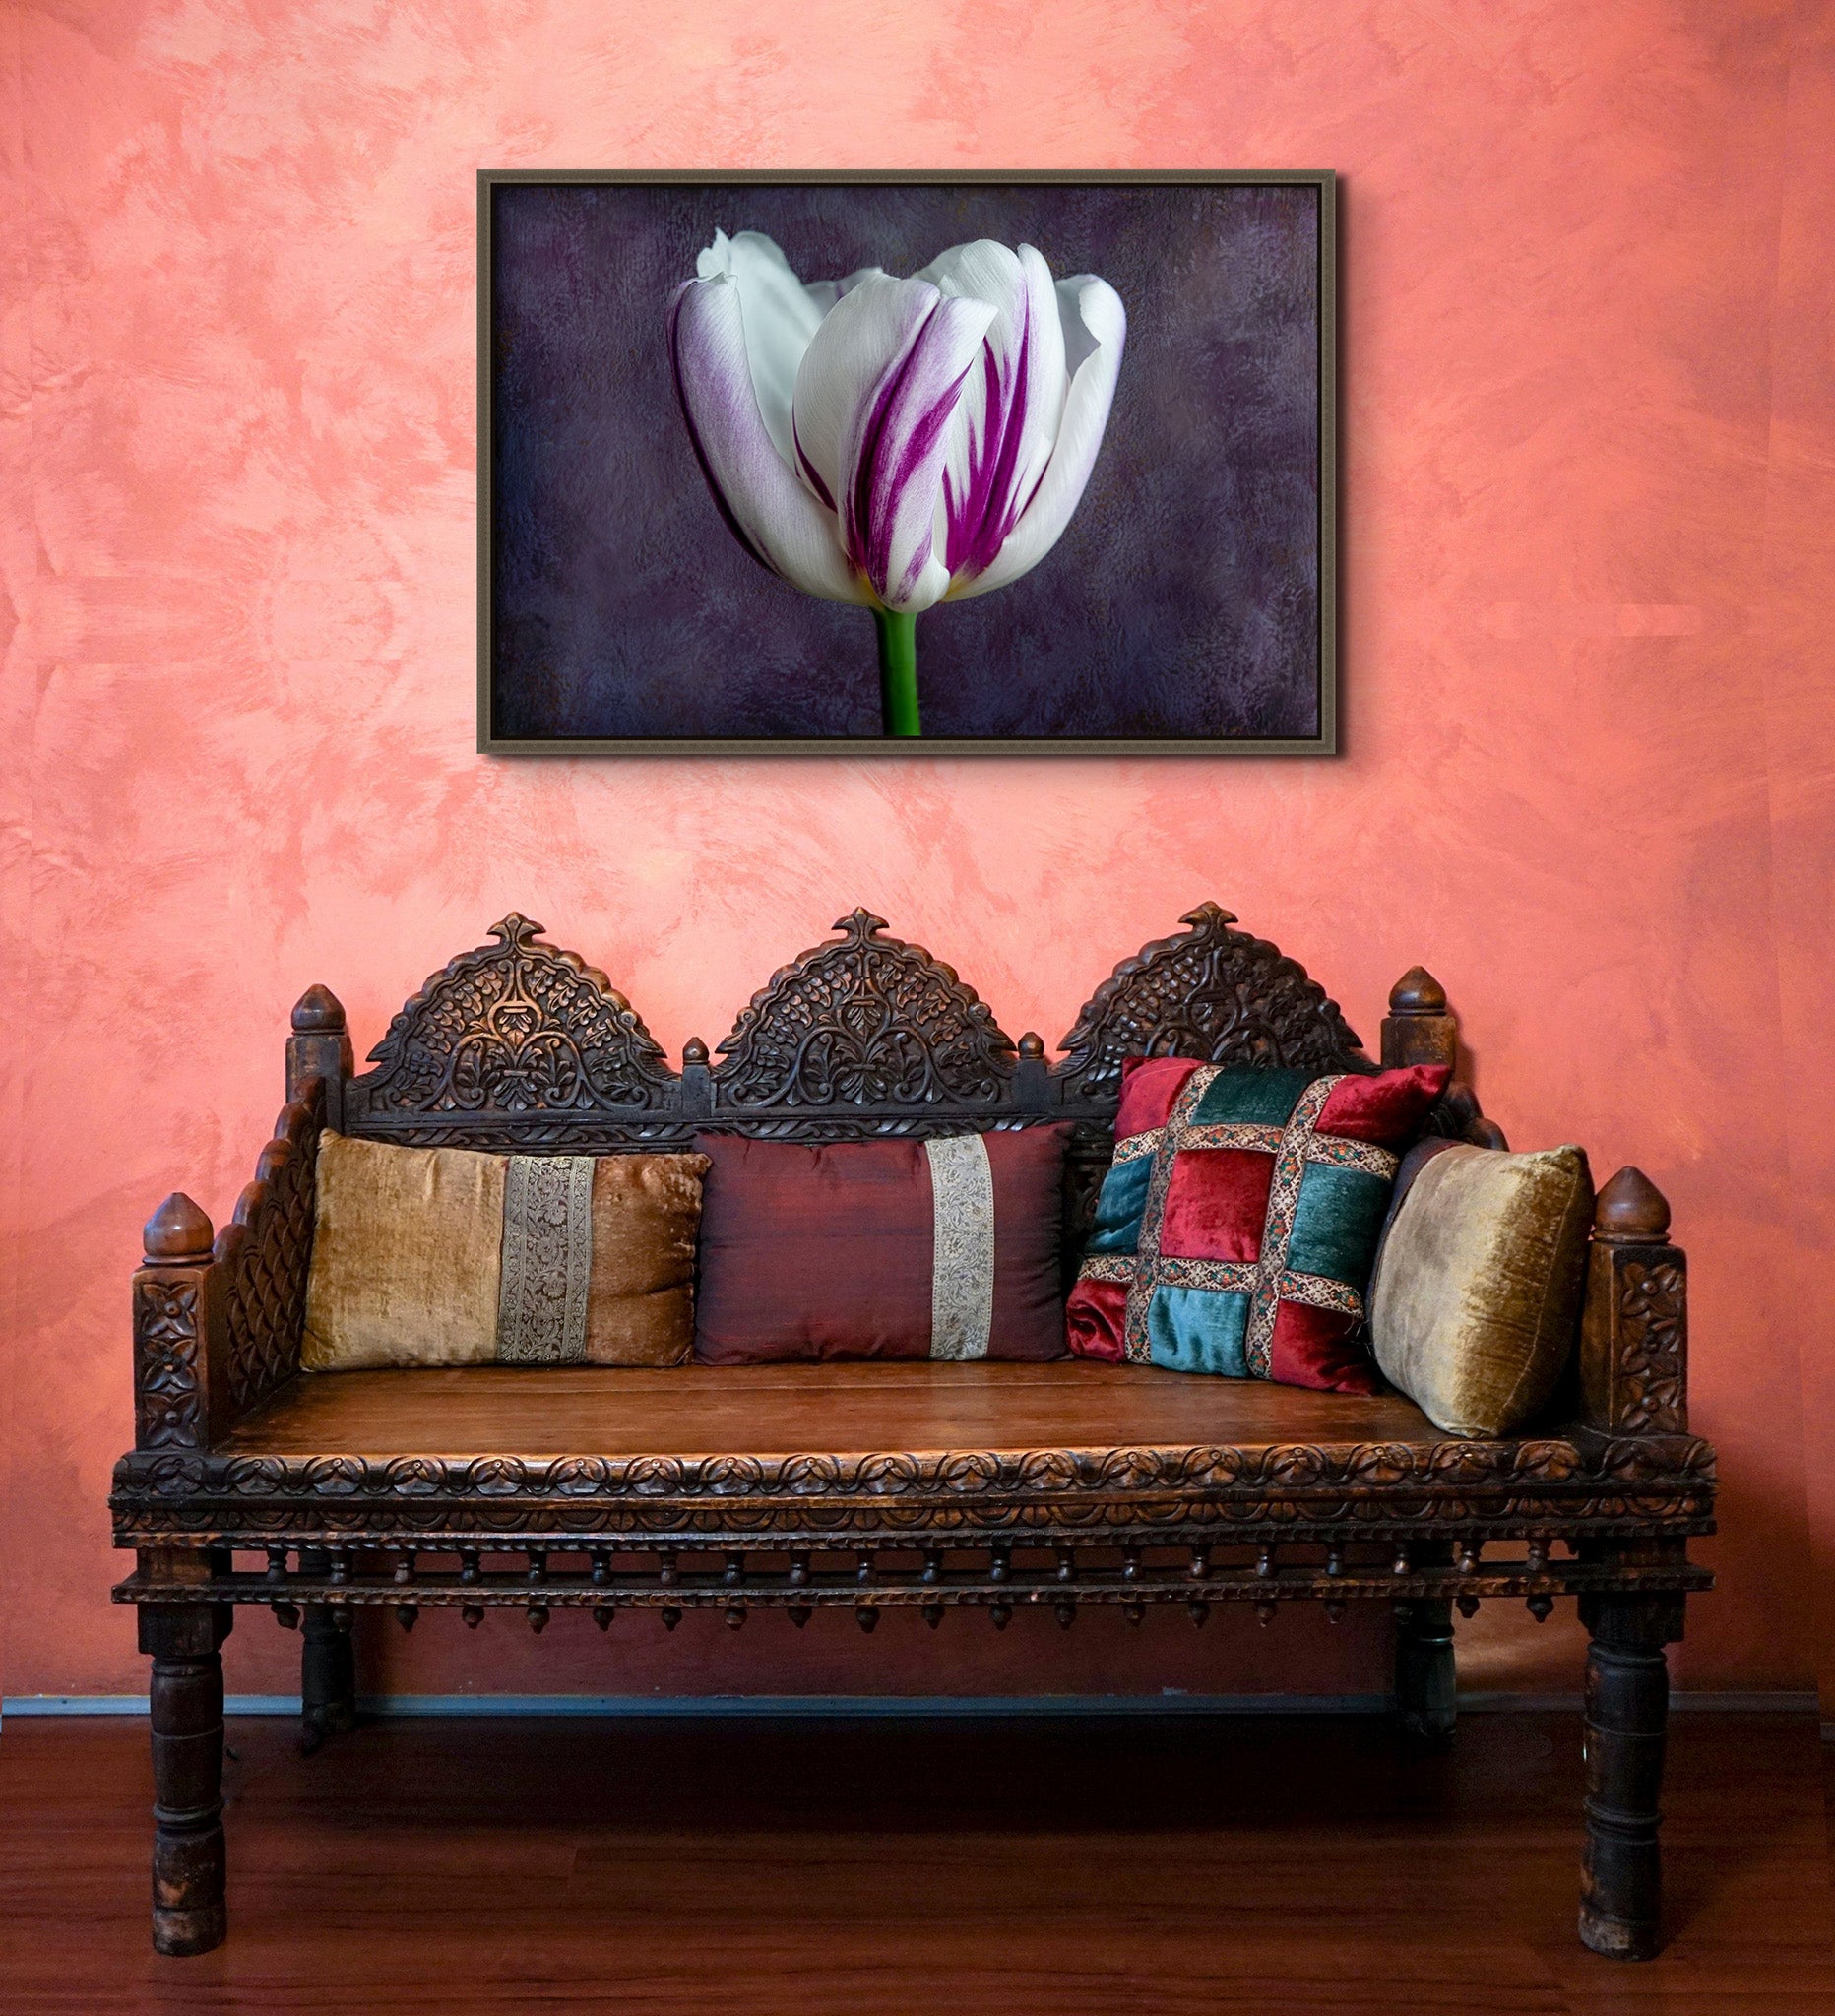 Picture hanging in an orange room over a metal bench. The picture is a fine art flower photograph of a single tulip titled "Audrey" by Cameron Dreaux of Dreaux Fine Art. 